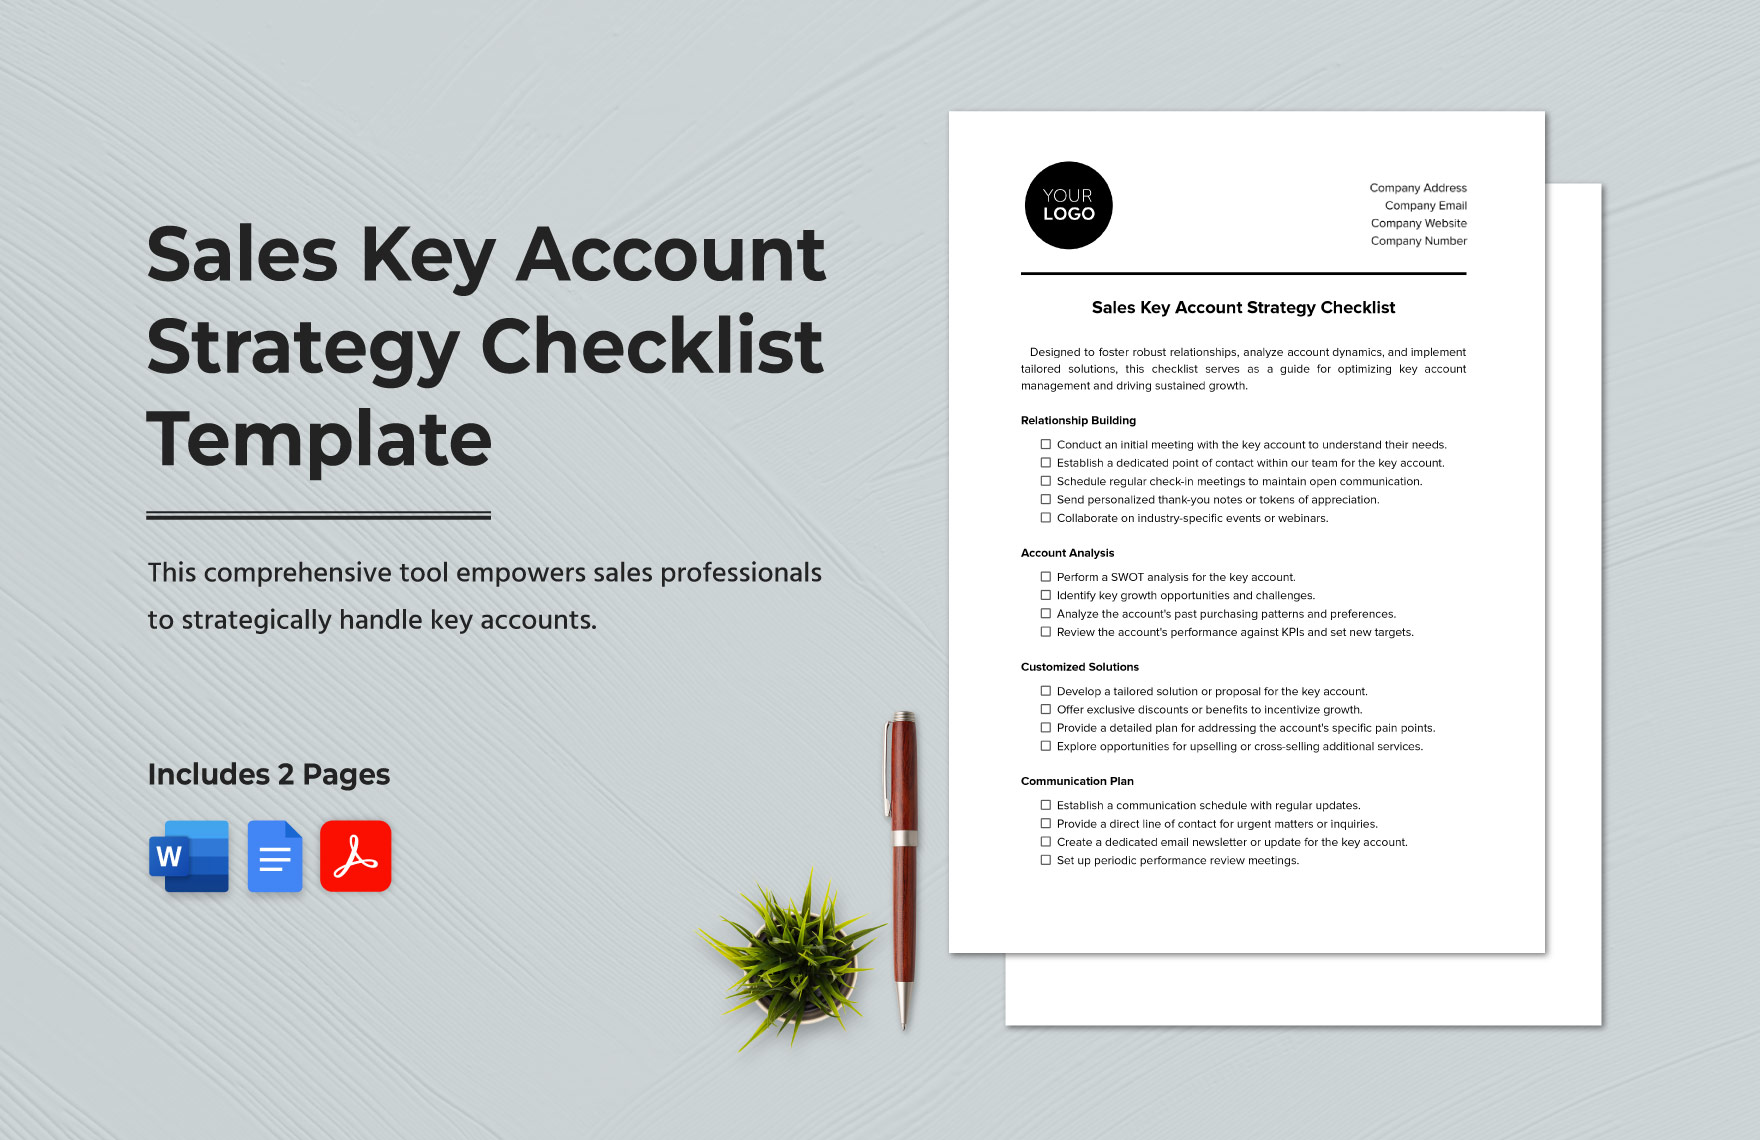 Sales Key Account Strategy Checklist Template